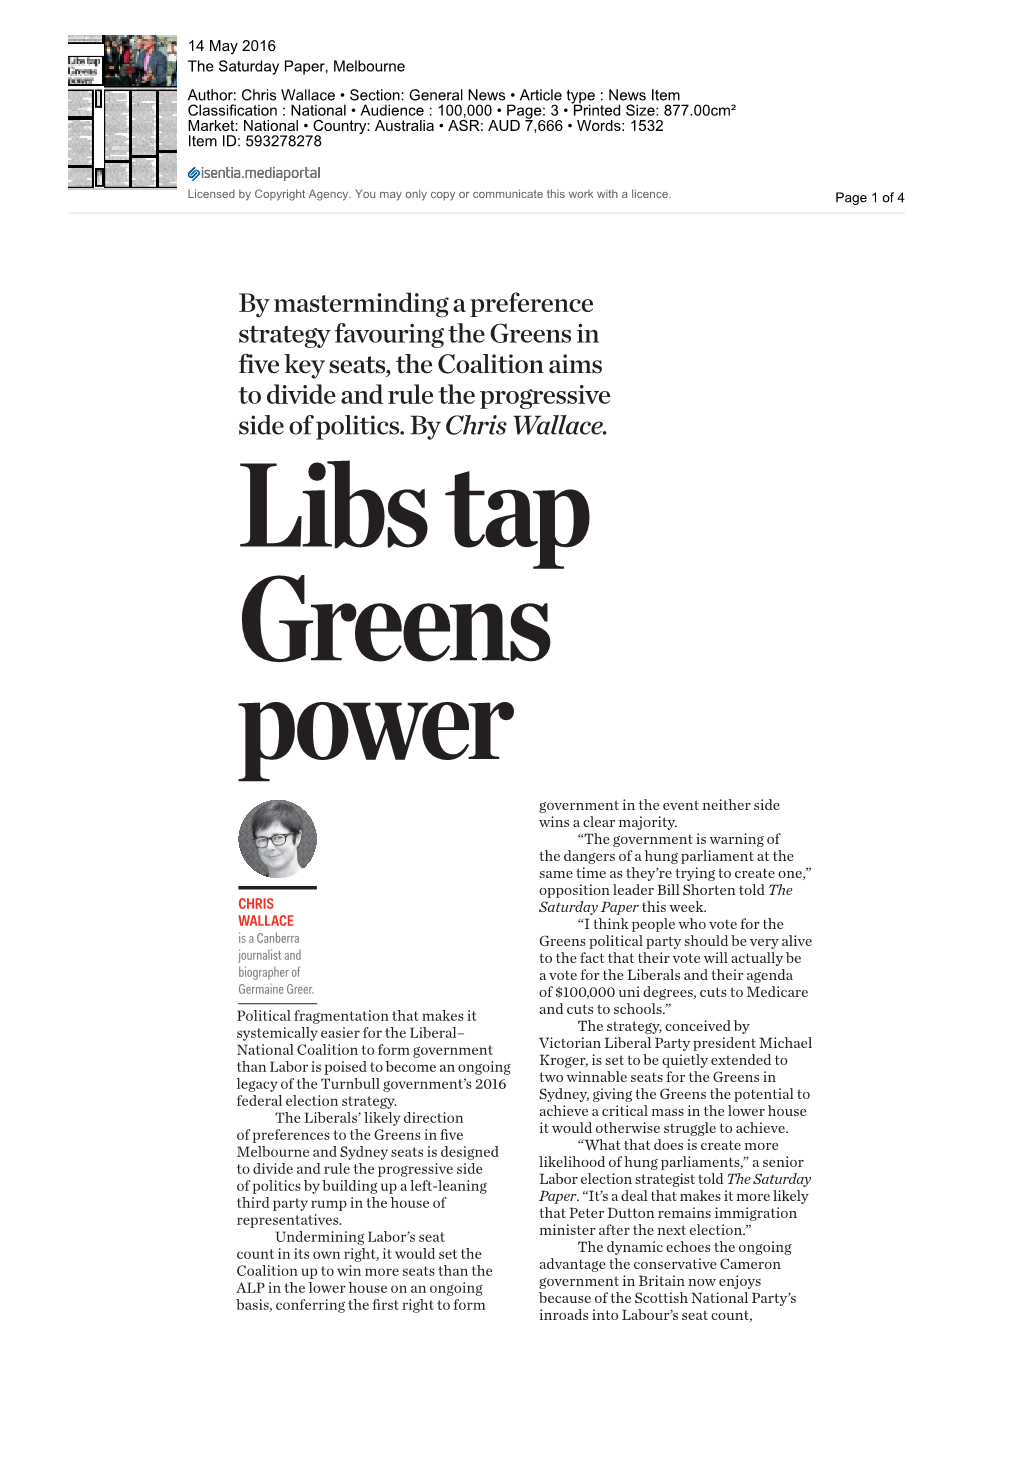 By Masterminding a Preference Strategy Favouring the Greens in Five Key Seats, the Coalition Aims to Divide and Rule the Progressive Side of Politics